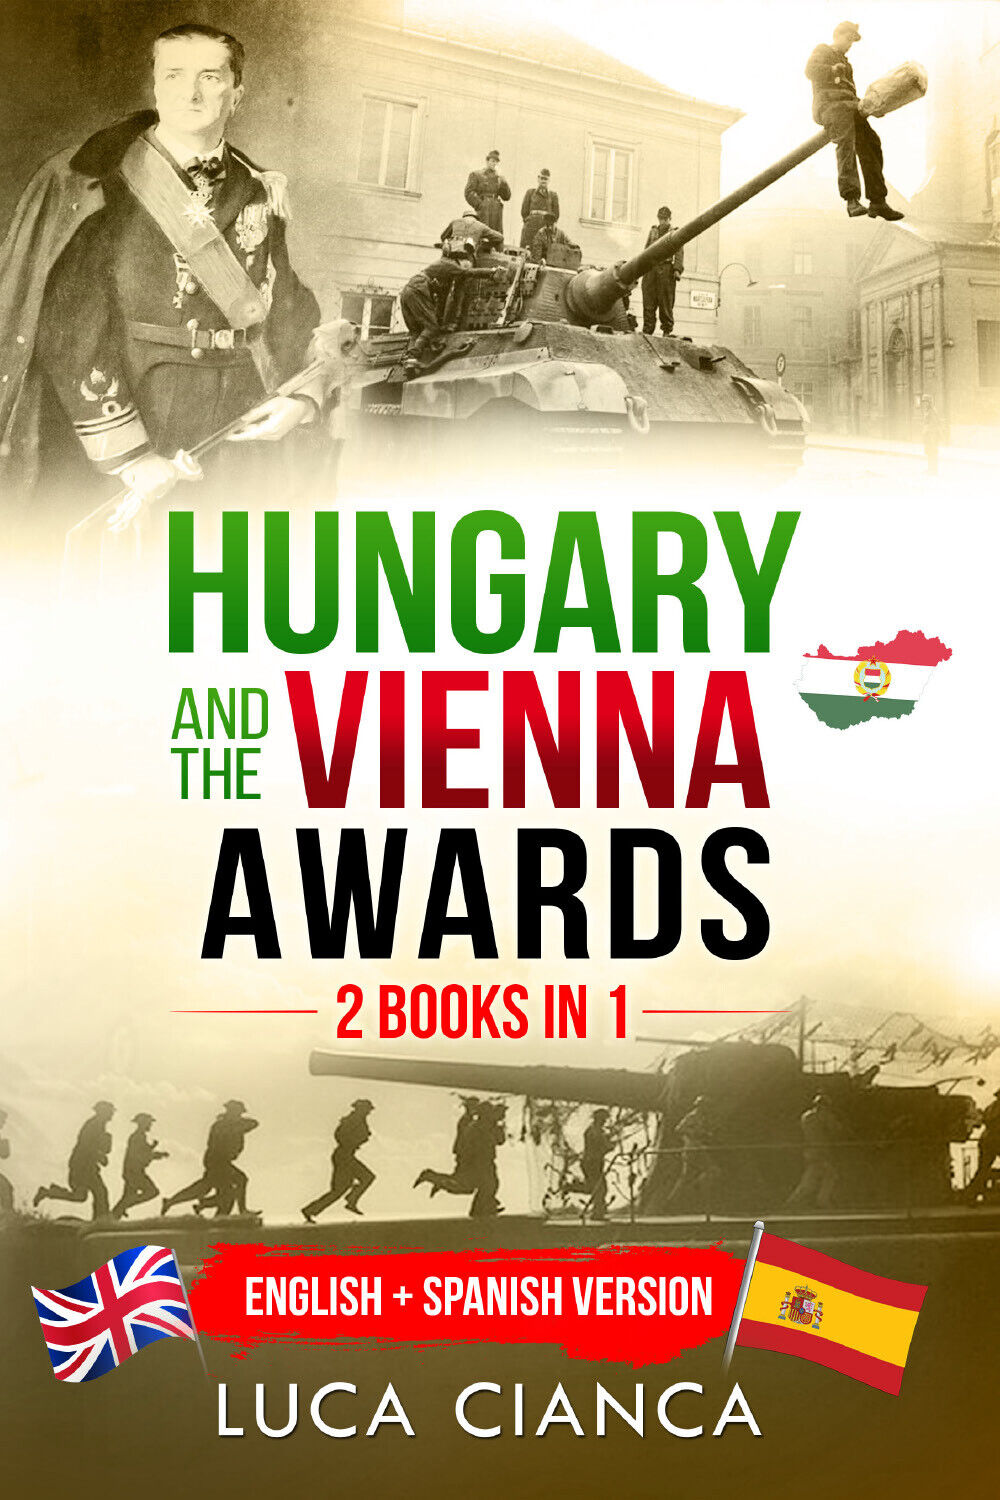 Hungary and the Vienna Awards. (2 Books in 1). English + Spanish Version di Luca